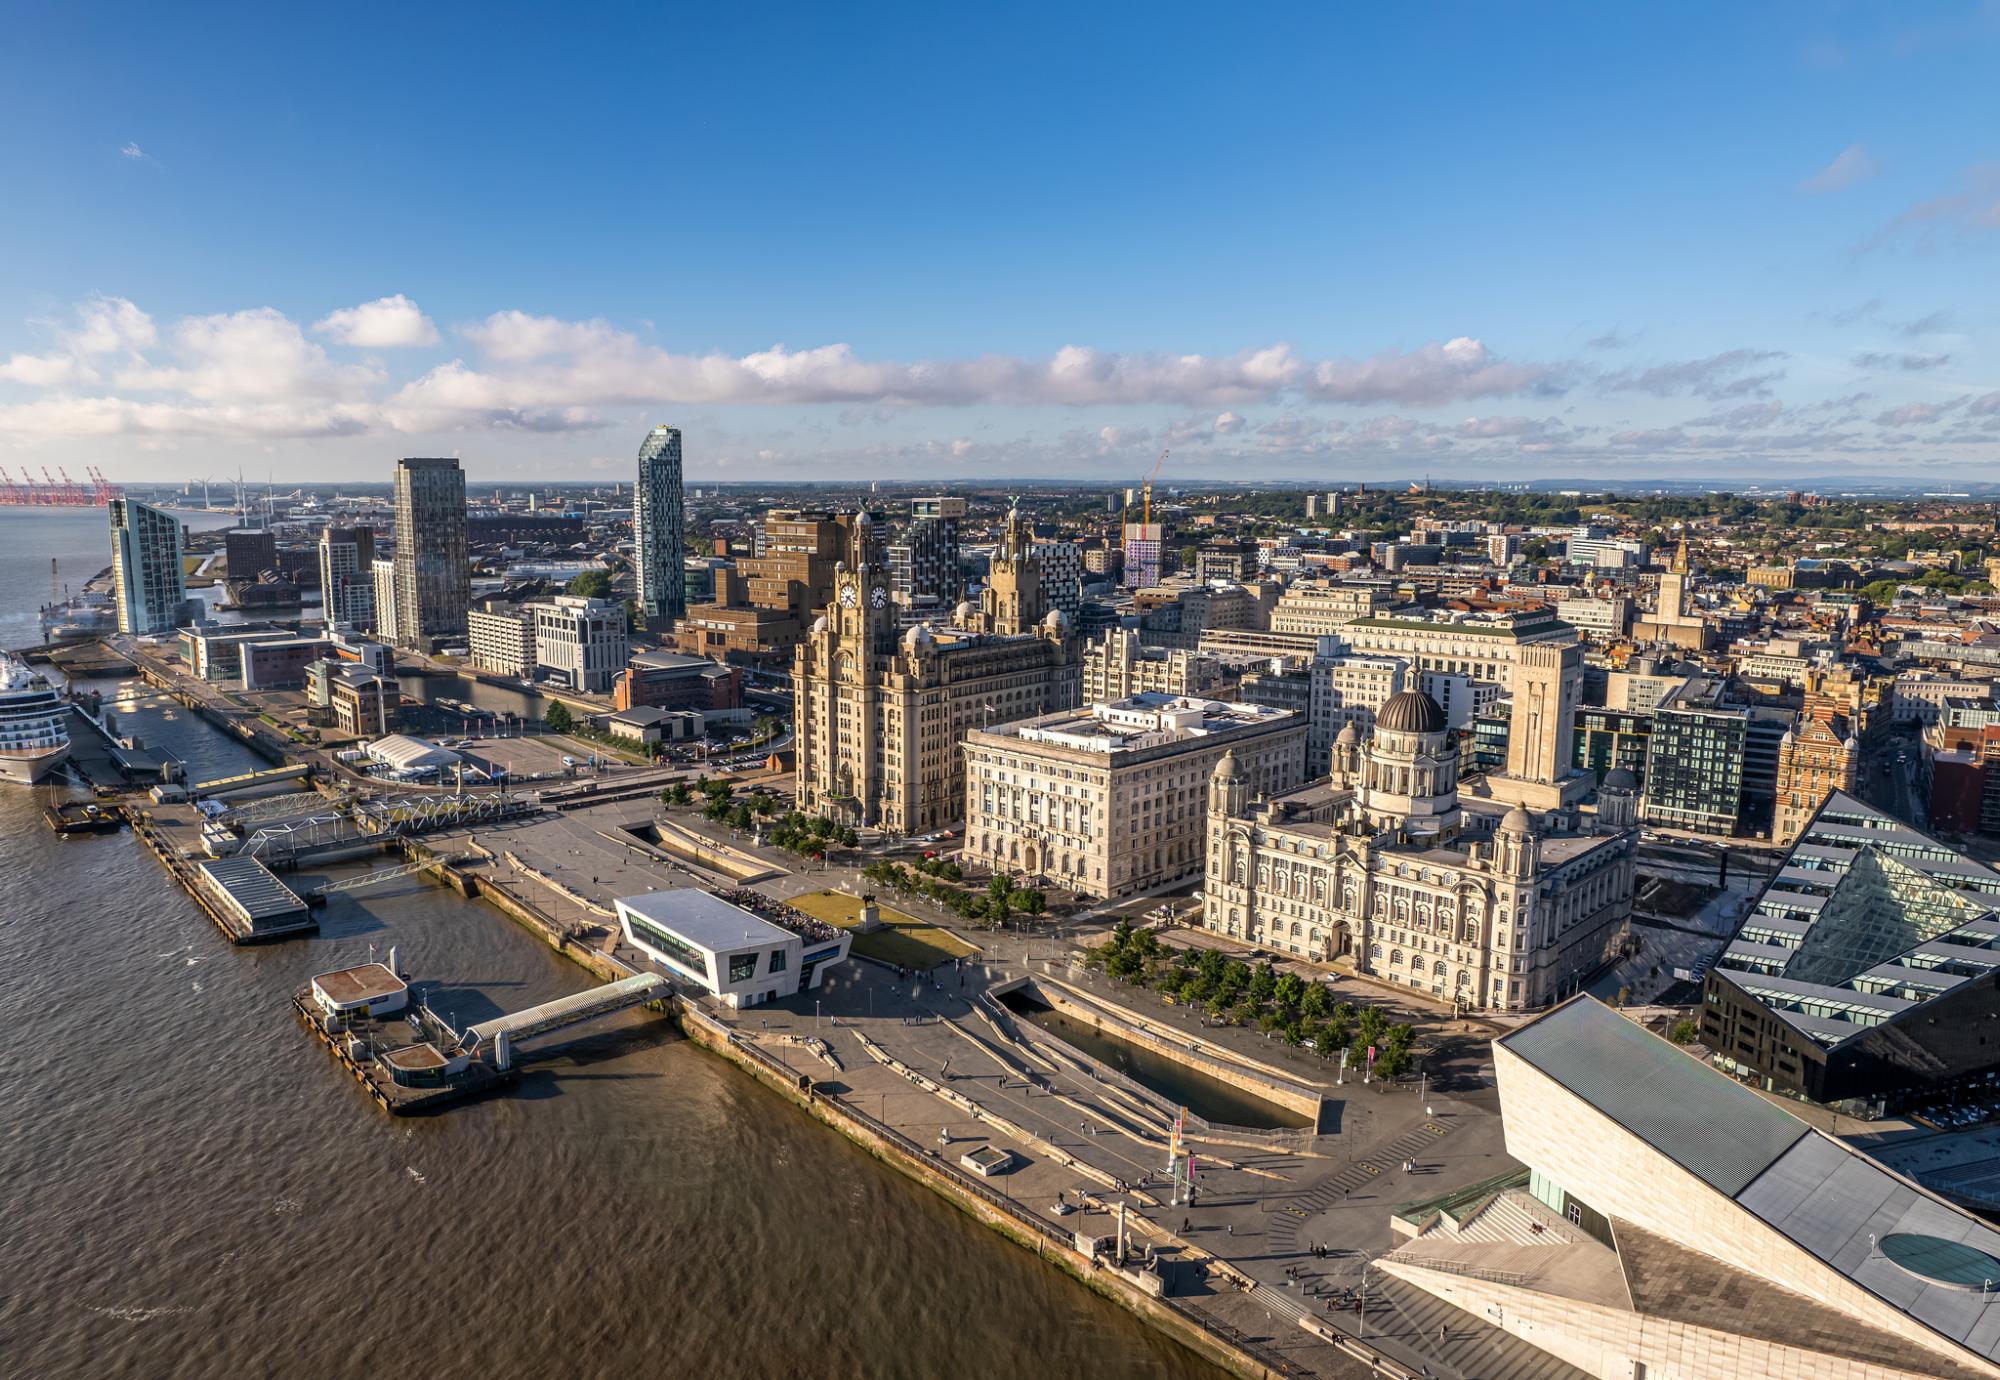 The drone aerial view of the city of Liverpool in England